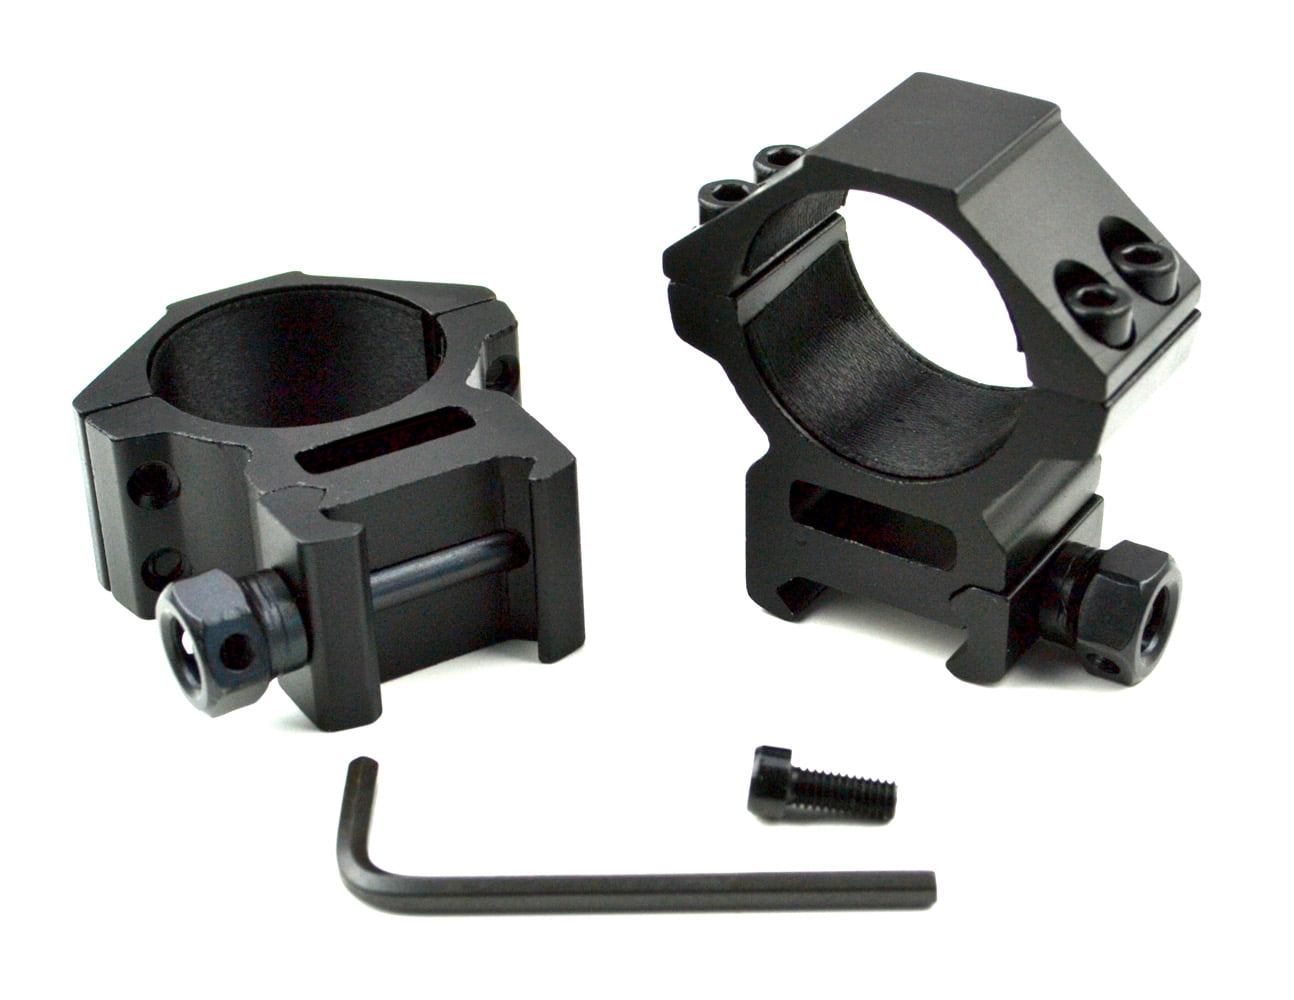 TACBRO Offset 2-Inch Center Height One Piece Scope Ring Mount for 30mm with One Free TACBRO Aluminum Opener Randomly Selected Color